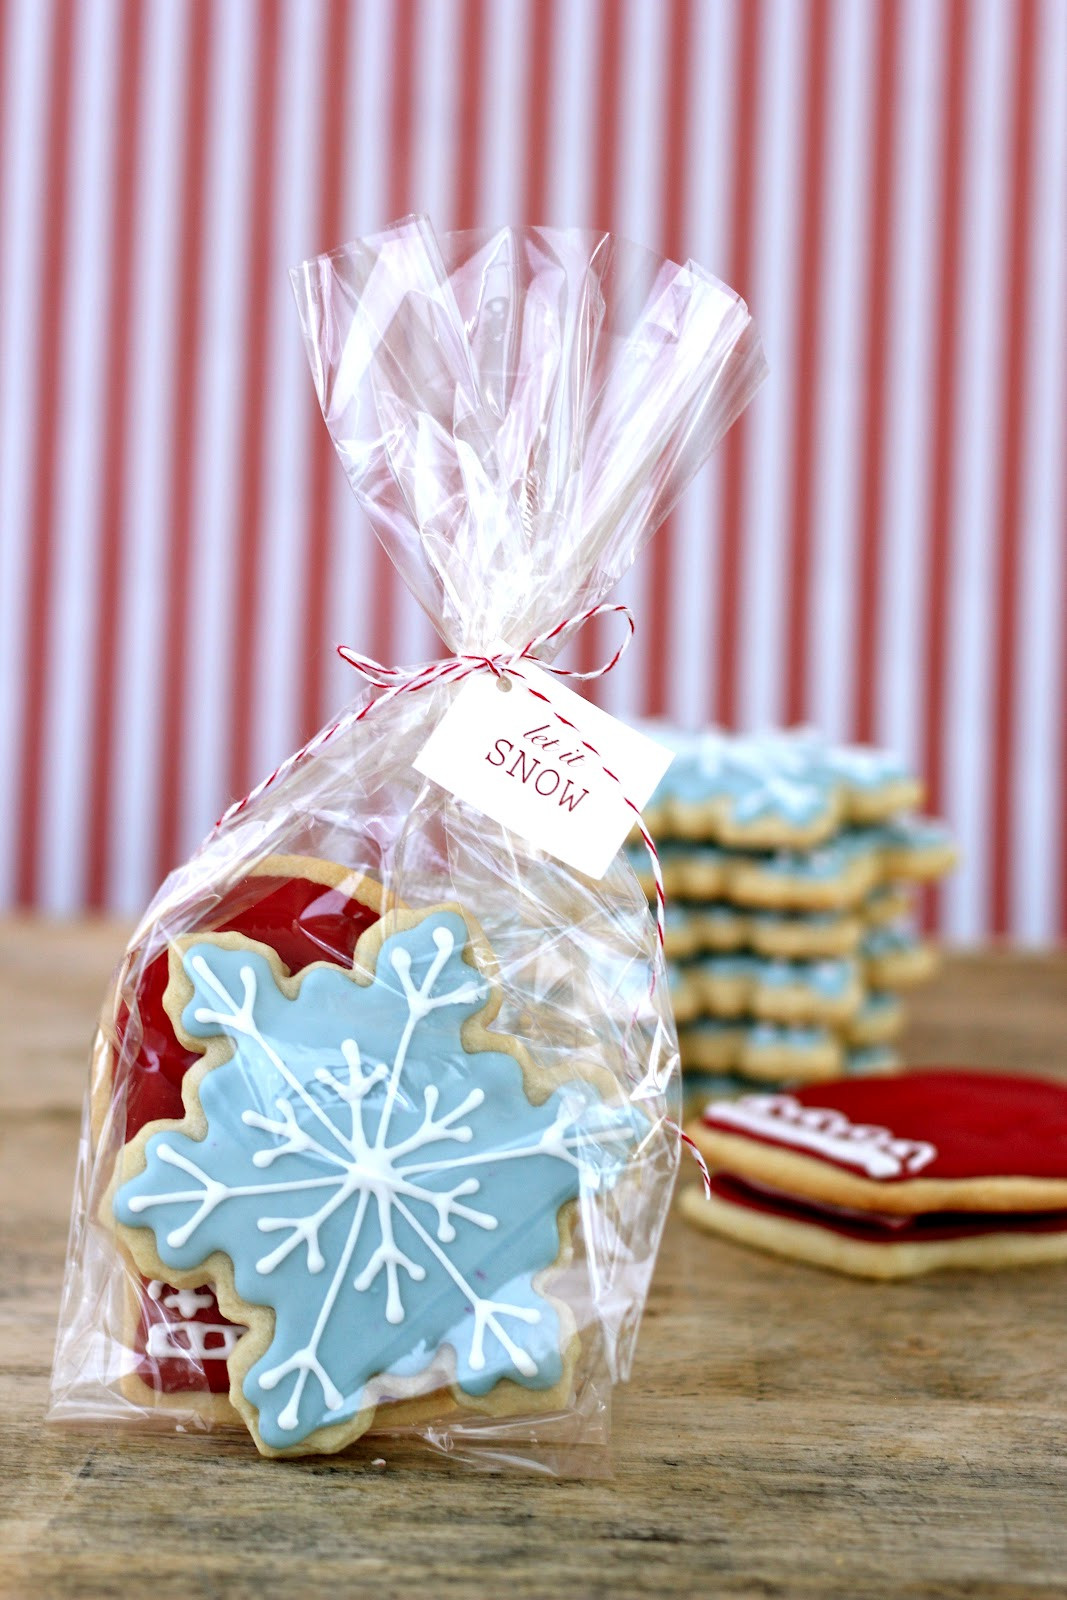 Christmas Cookies In A Bag
 Jenny Steffens Hobick Packaging Baked Goods in Your